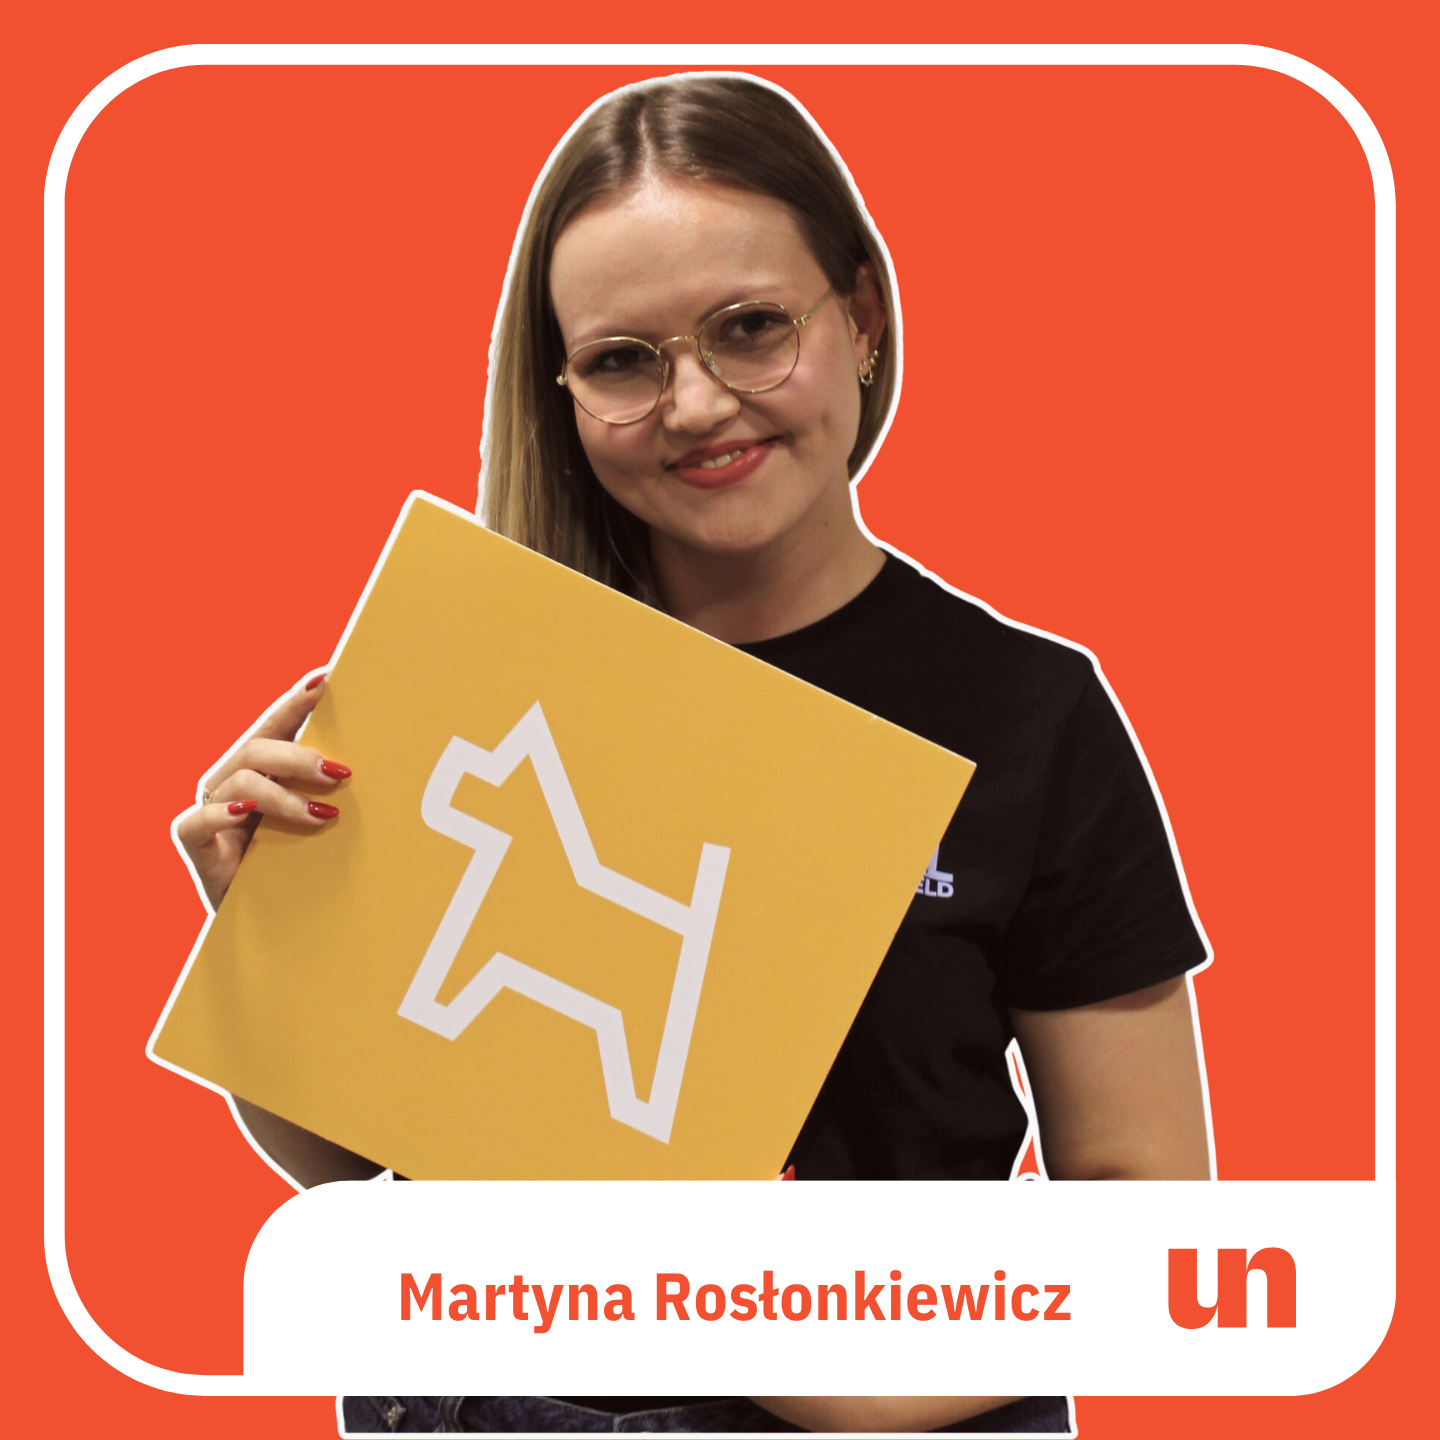 CLICK AND READ MORE ABOUT MARTYNA